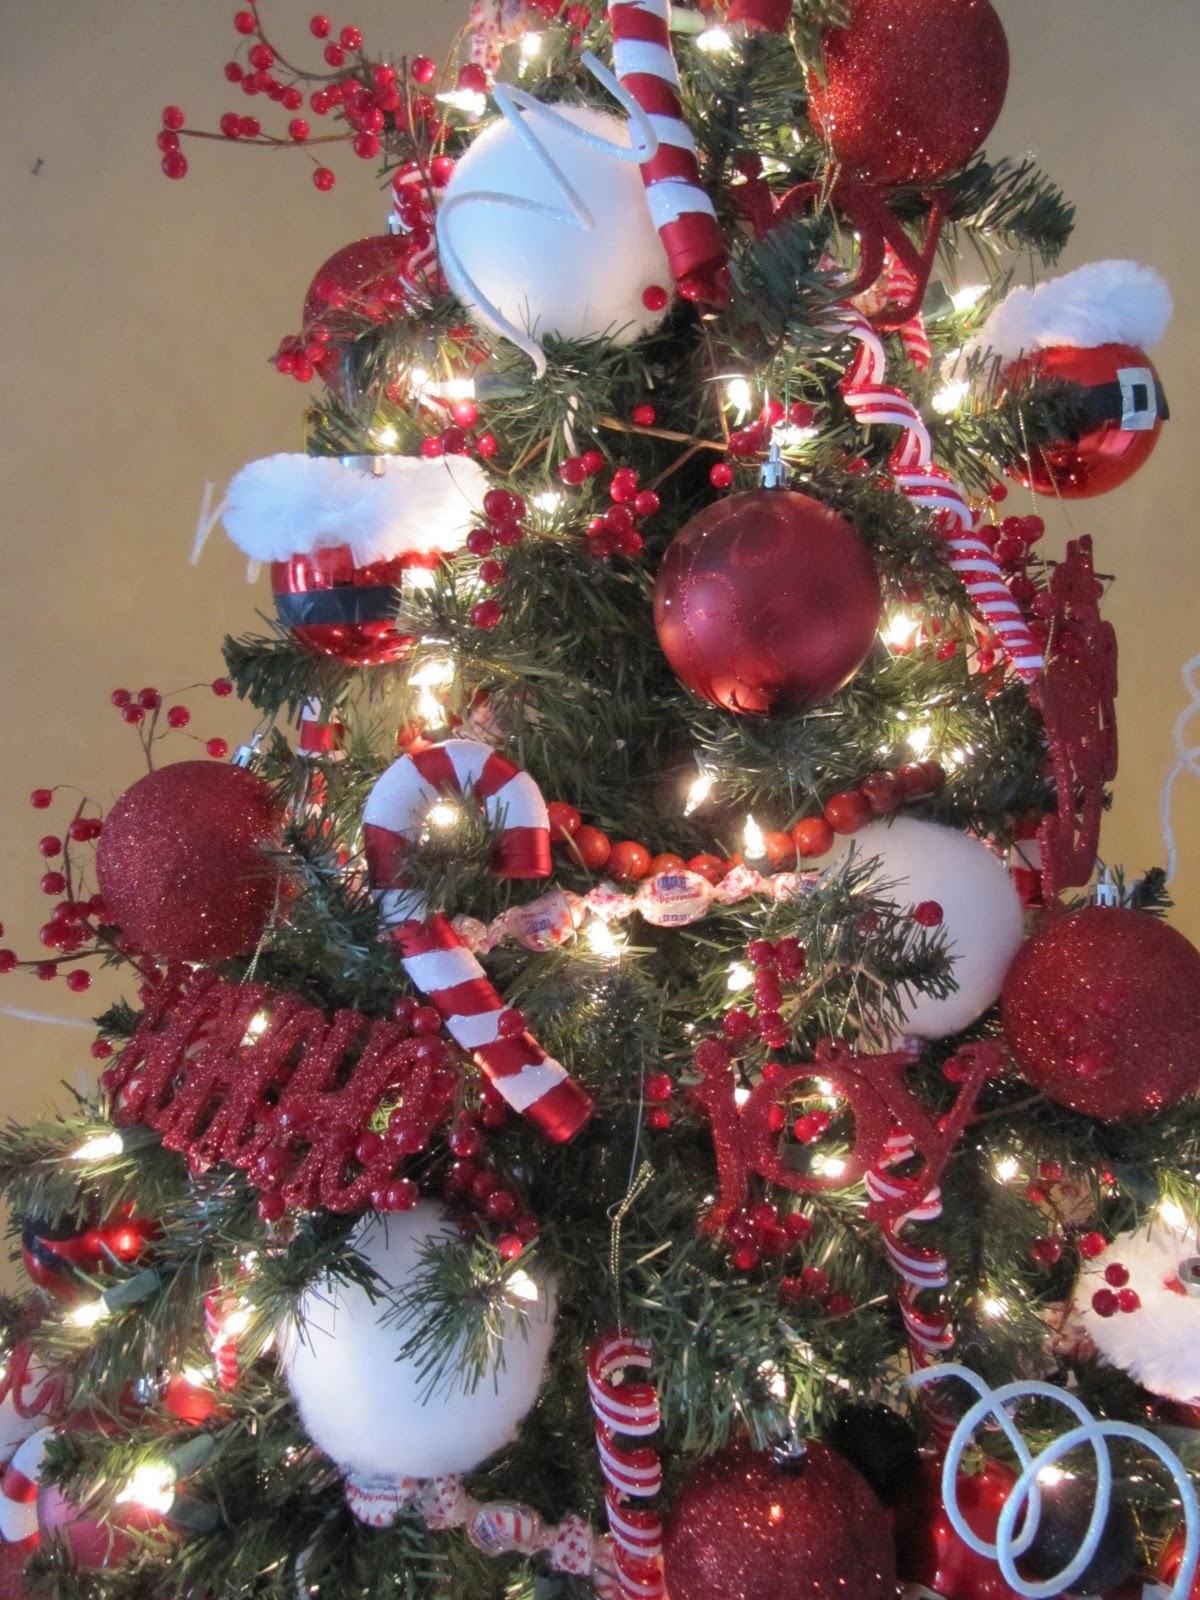 Sew Many Ways...: How To Decorate A Christmas Tree...